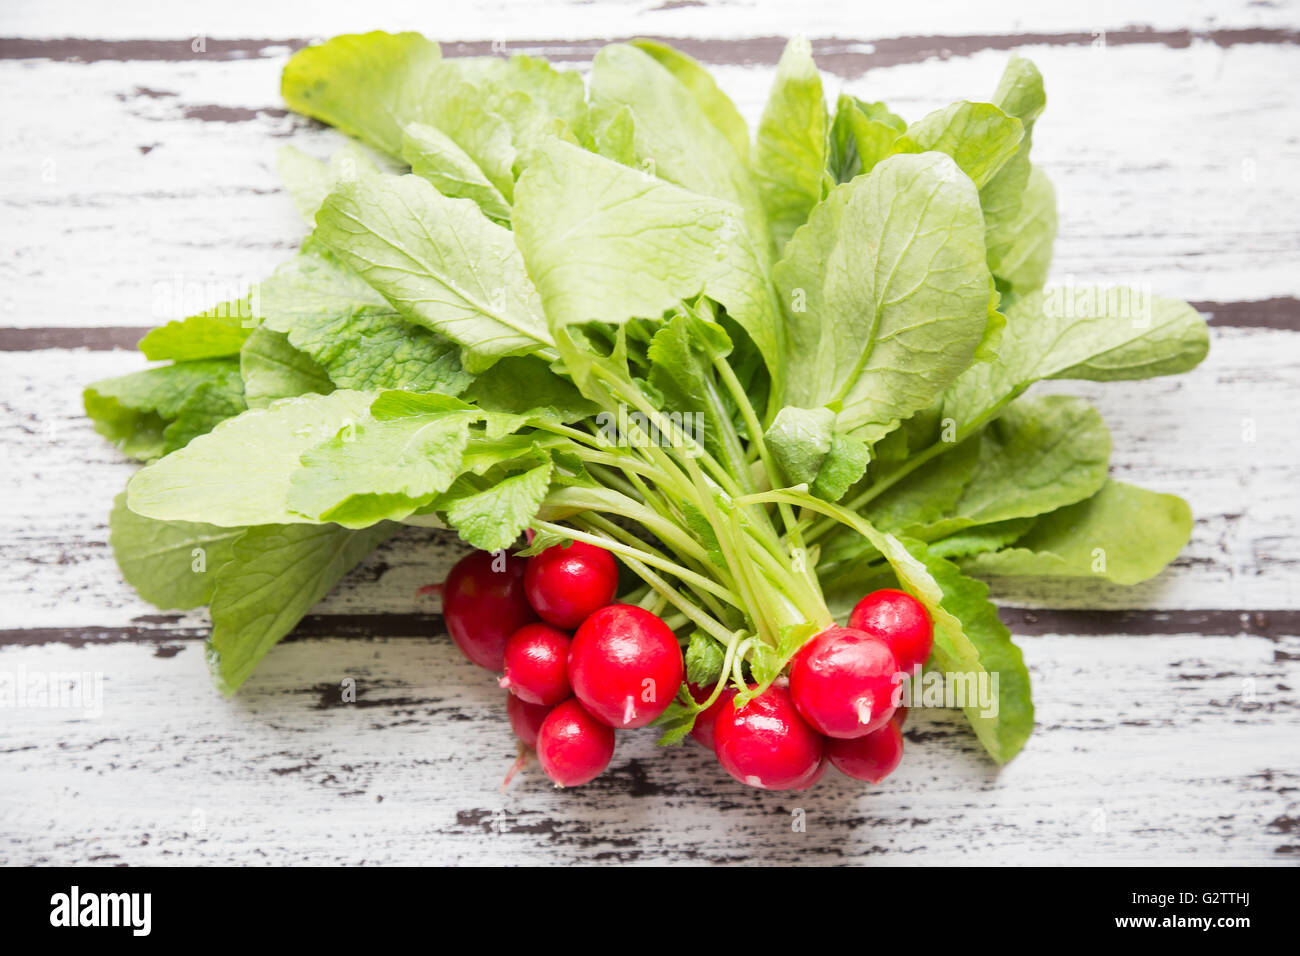 Little red turnips on a wooden table Stock Photo